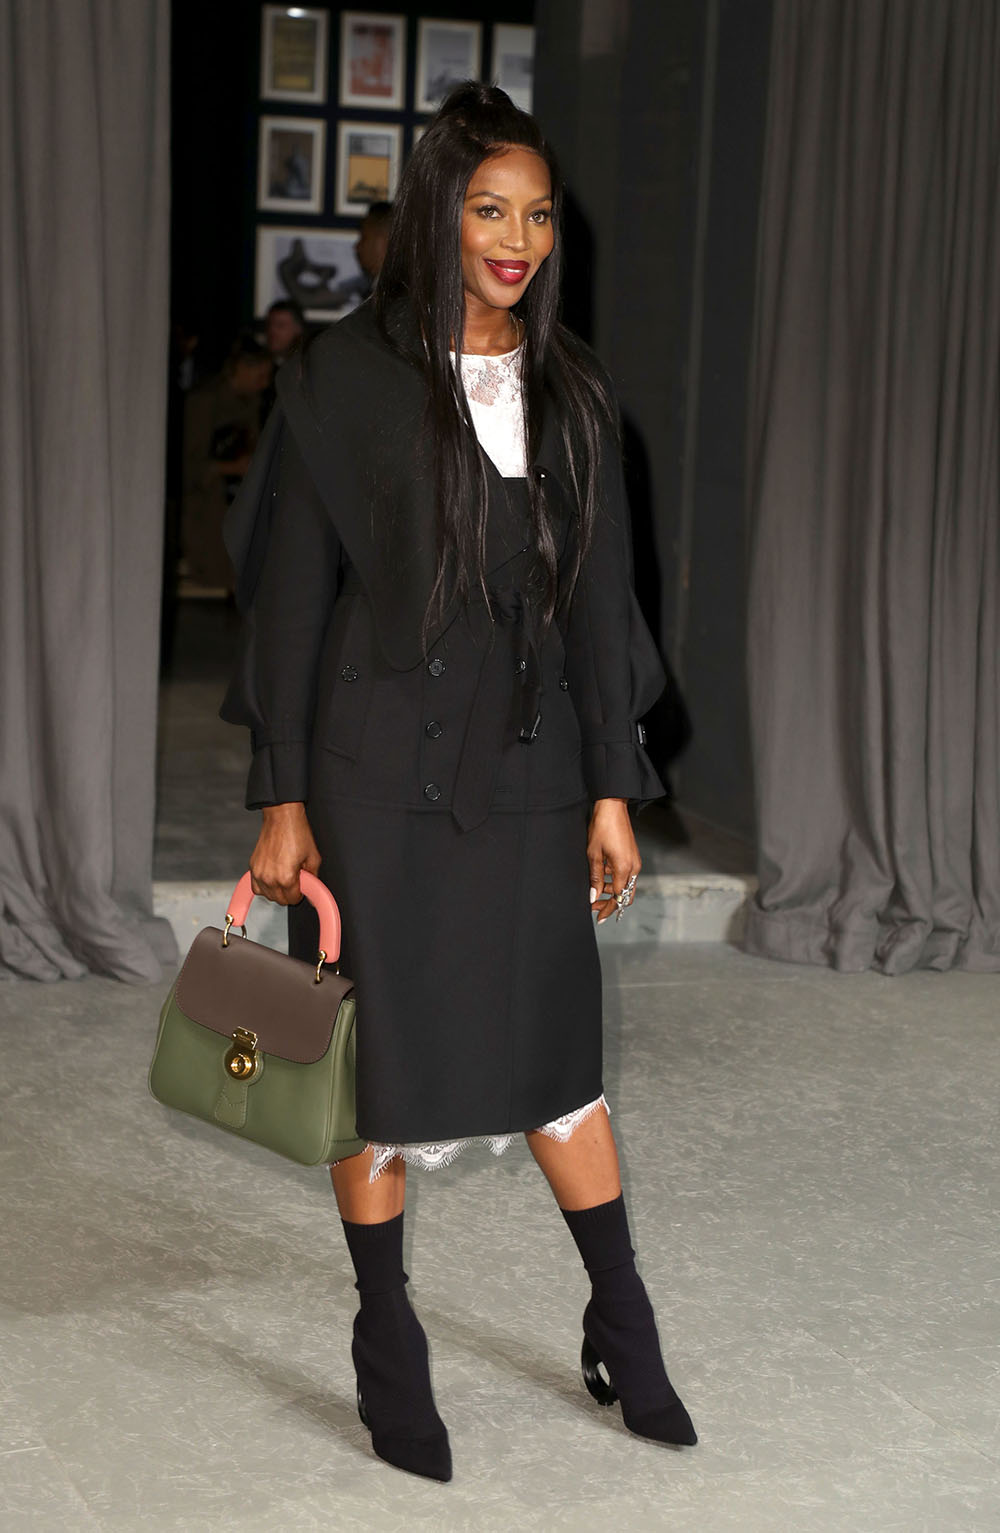 LONDON, ENGLAND - FEBRUARY 20: Naomi Campbell attends the Burberry show during the London Fashion Week February 2017 collections on February 20, 2017 in London, England. (Photo by Mike Marsland/Mike Marsland/WireImage)